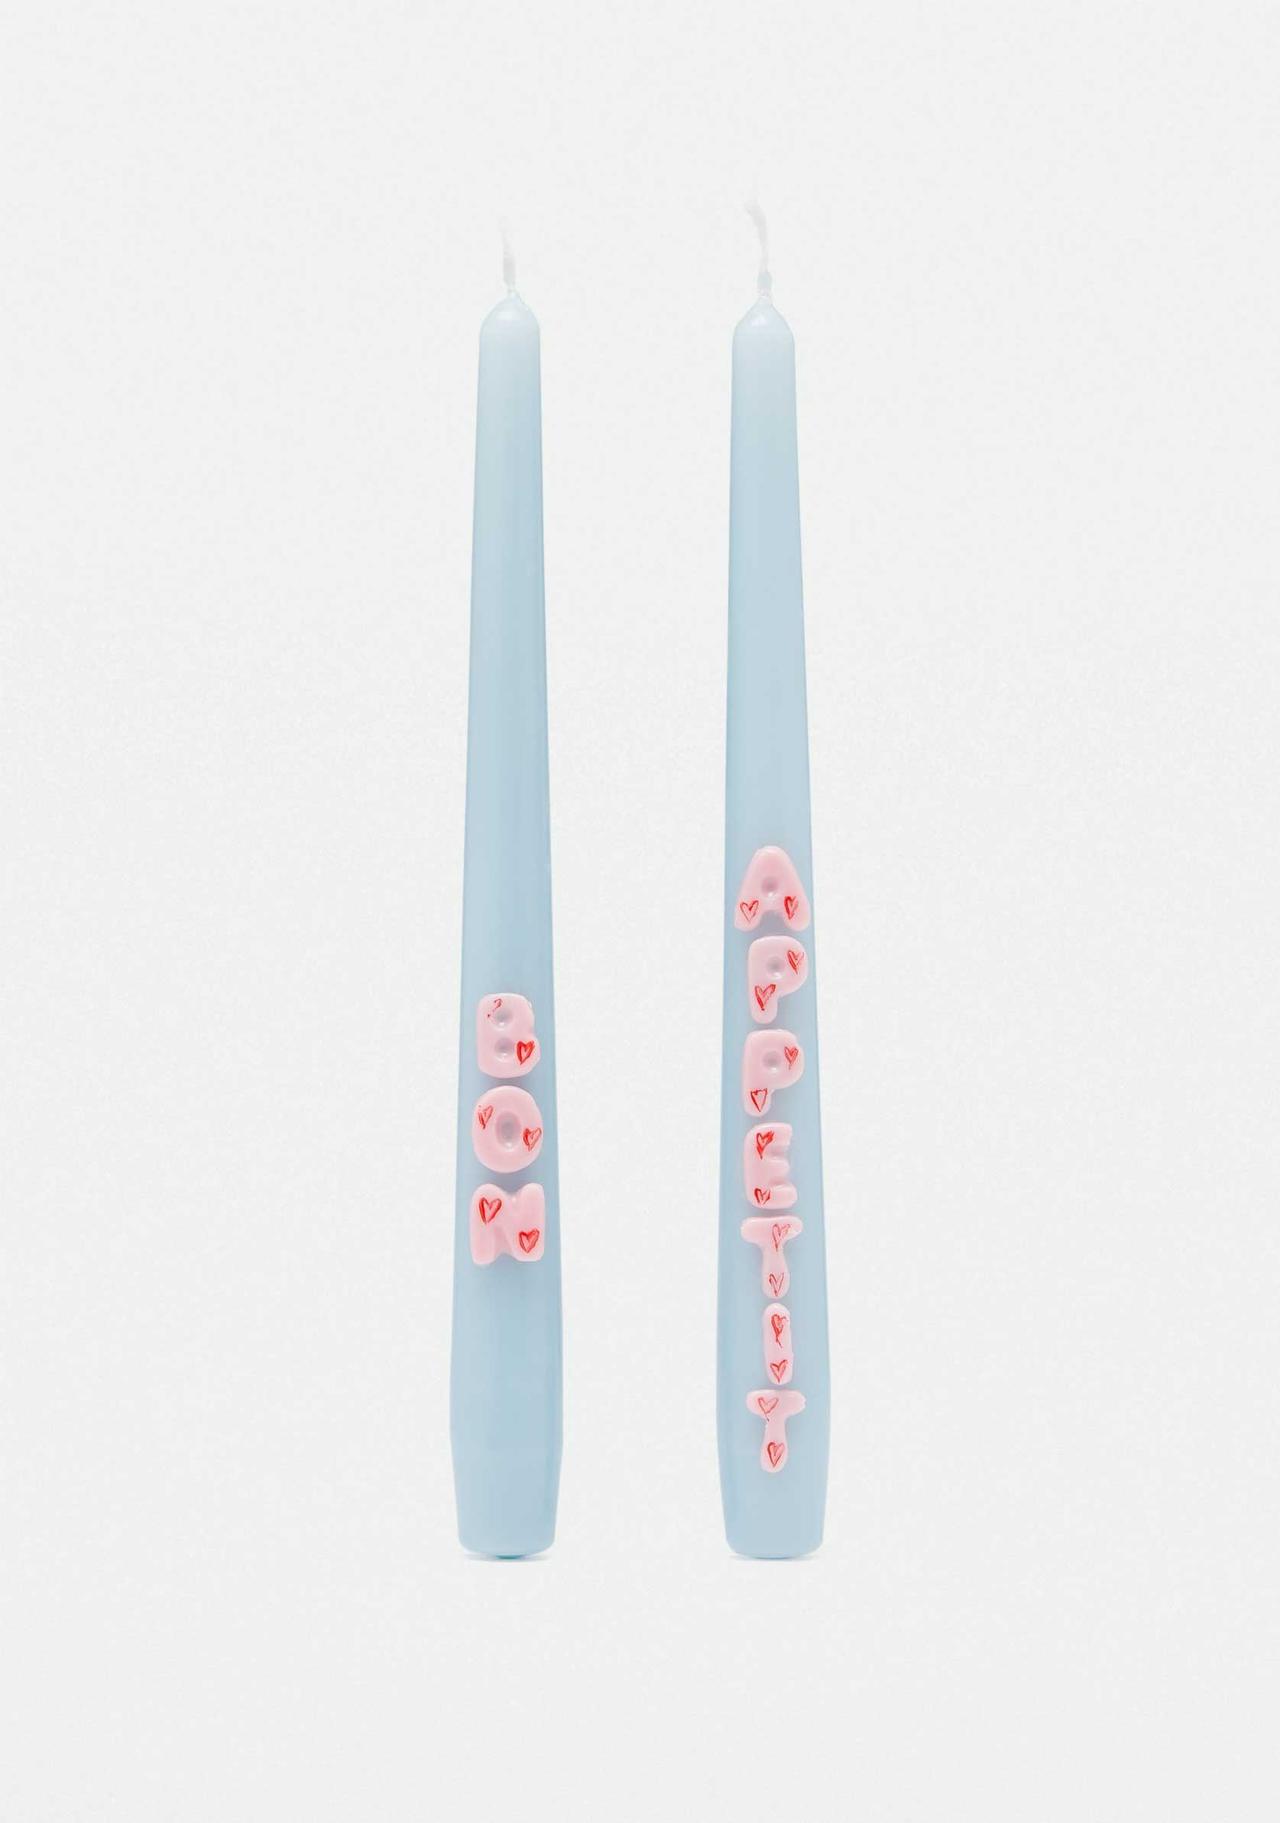 Two baby blue tall candles with Bon Appetite in light pink wax relief illustrated with red love hearts